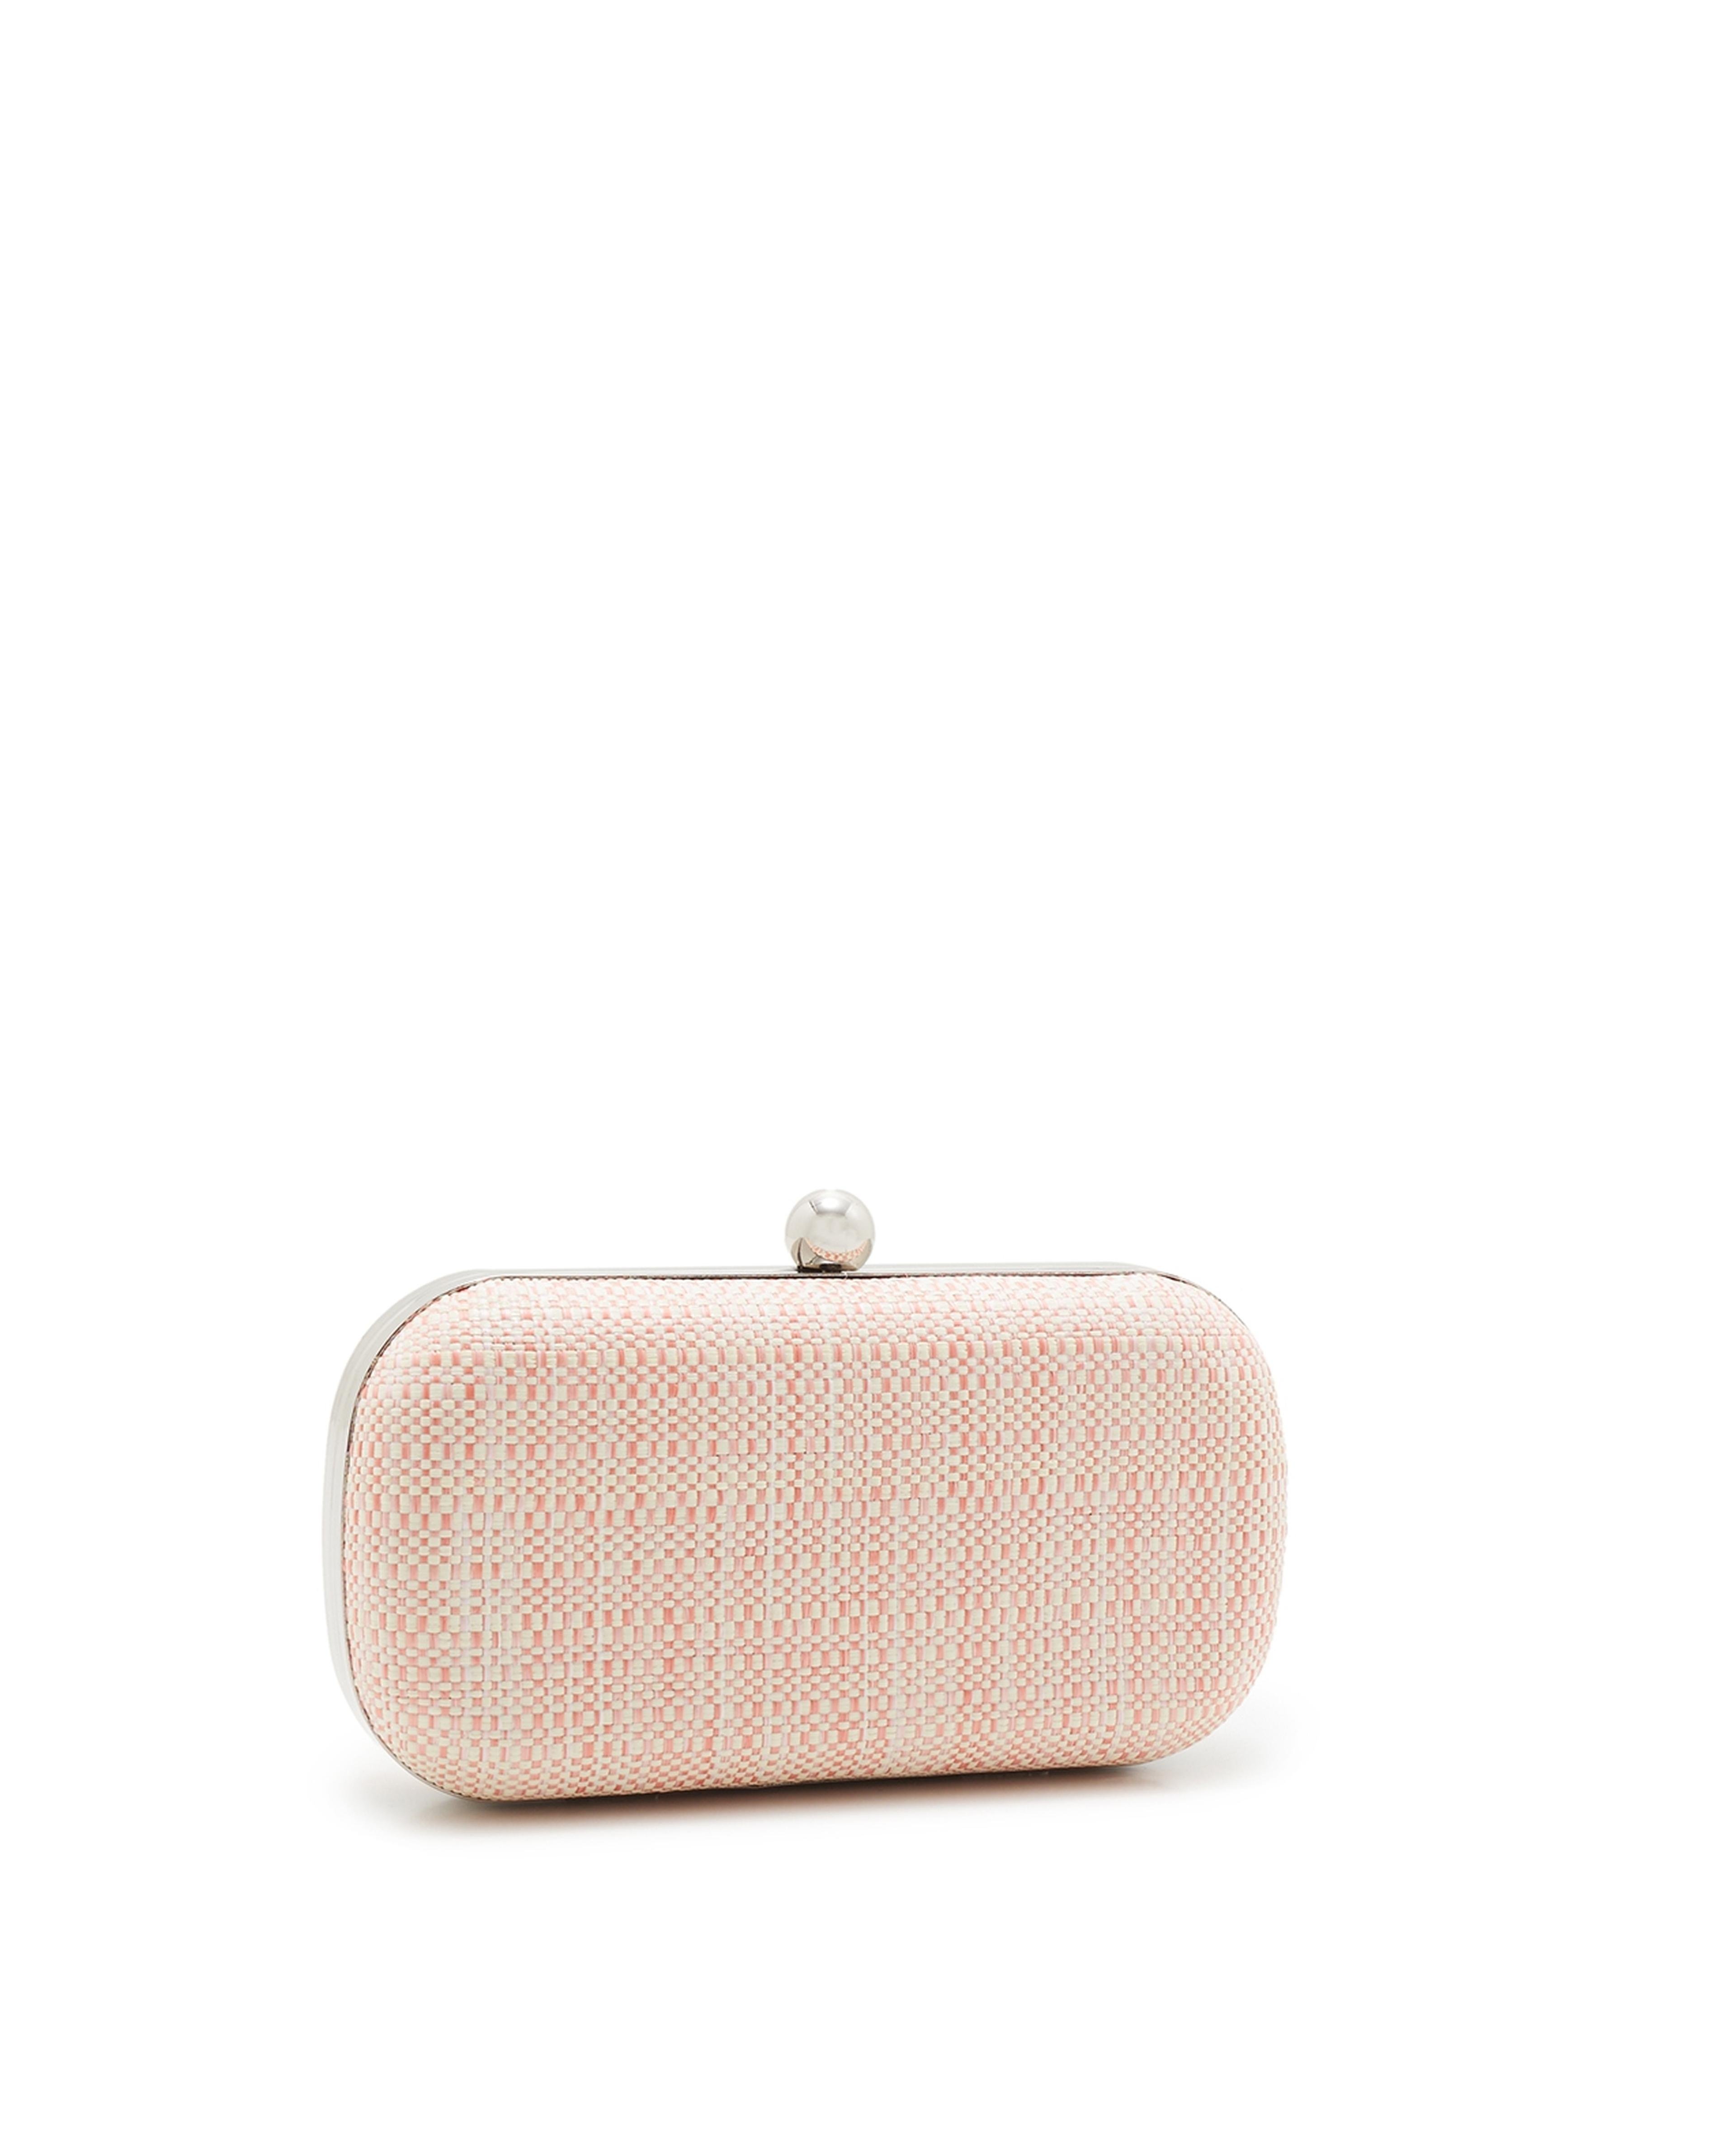 Patterned Clutch with Sling